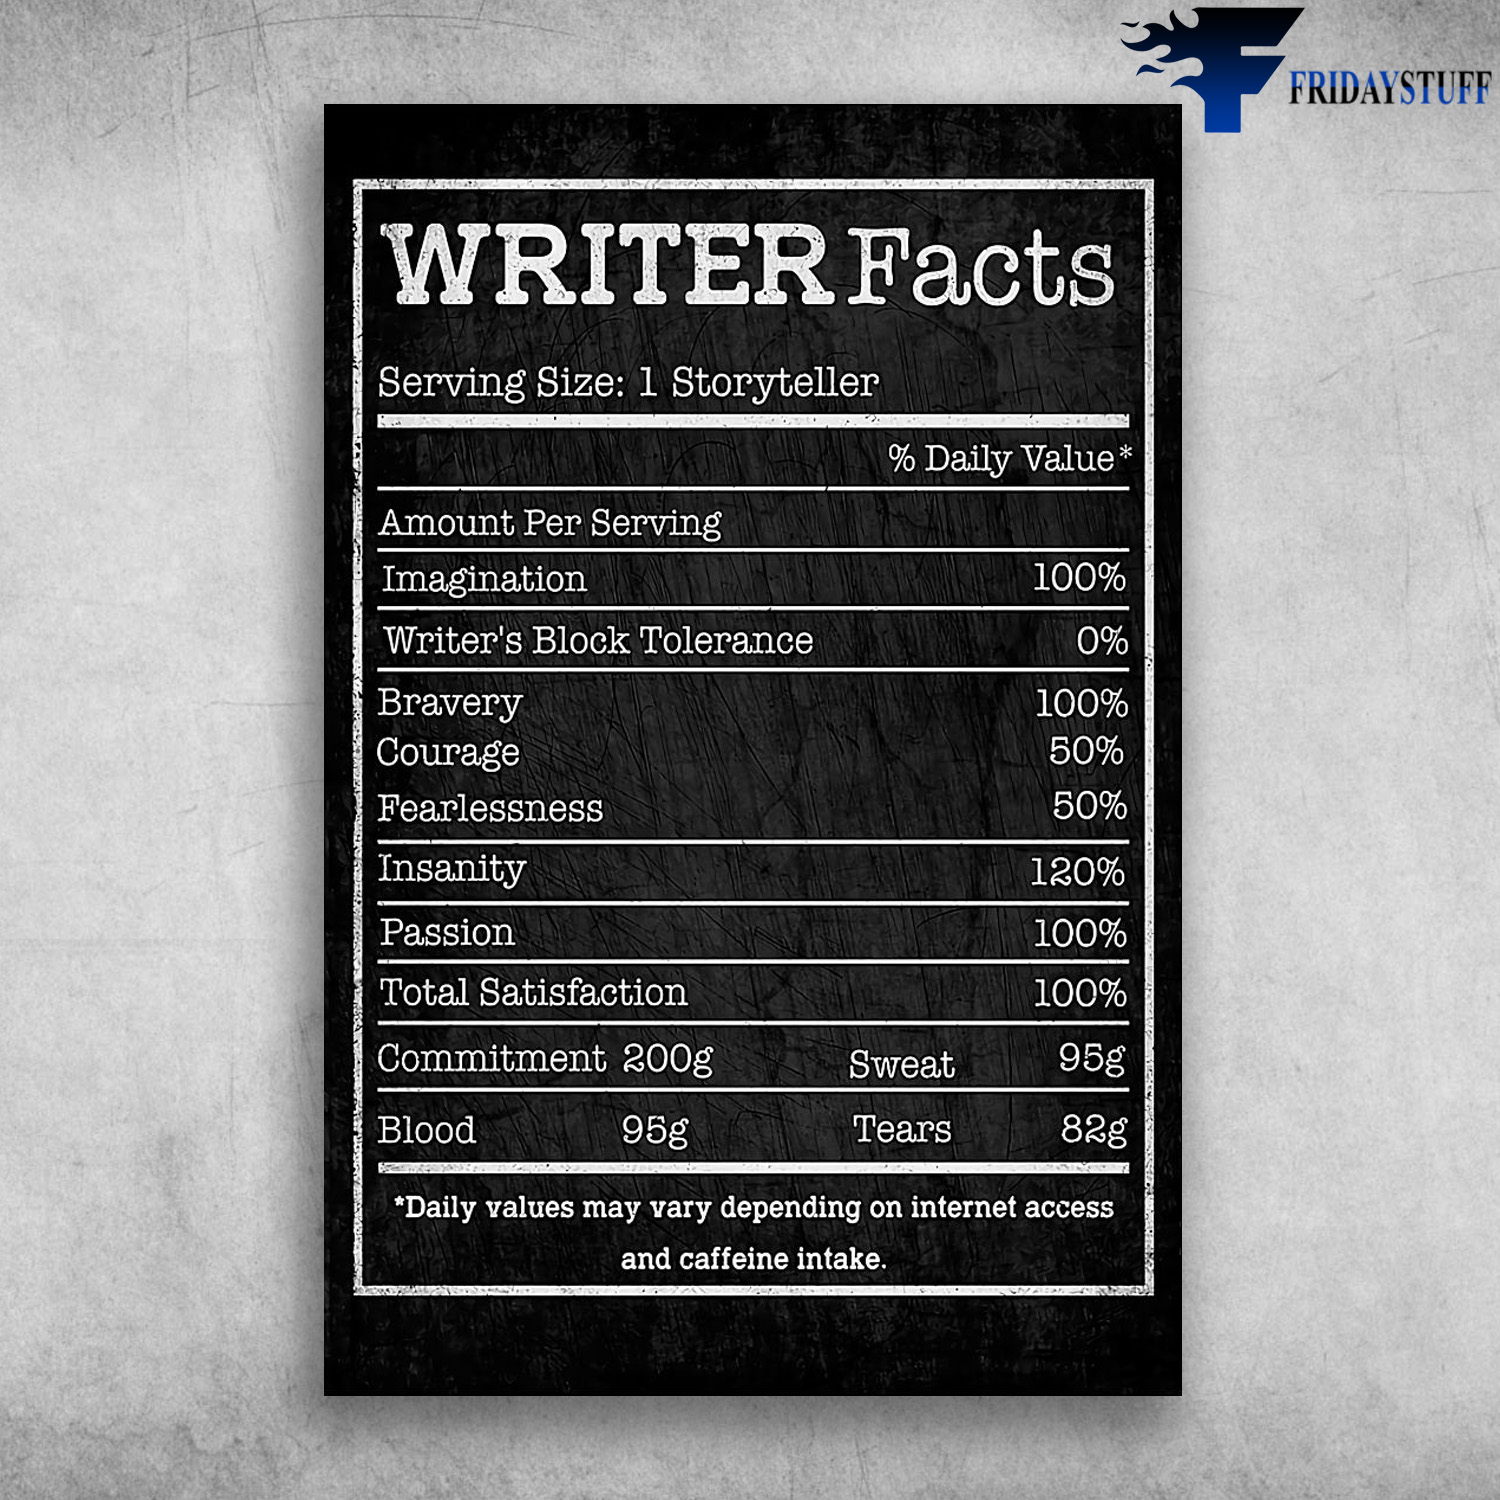 Writeer Facts - Serving Size, 1 Storyteller, Amount Serving, Imagination, Writer's Block Tolerance, Bravery, Courage, Fearlessness, Insanity, Passion, Total Satisfaction, Commitment 200g, Blood 95g